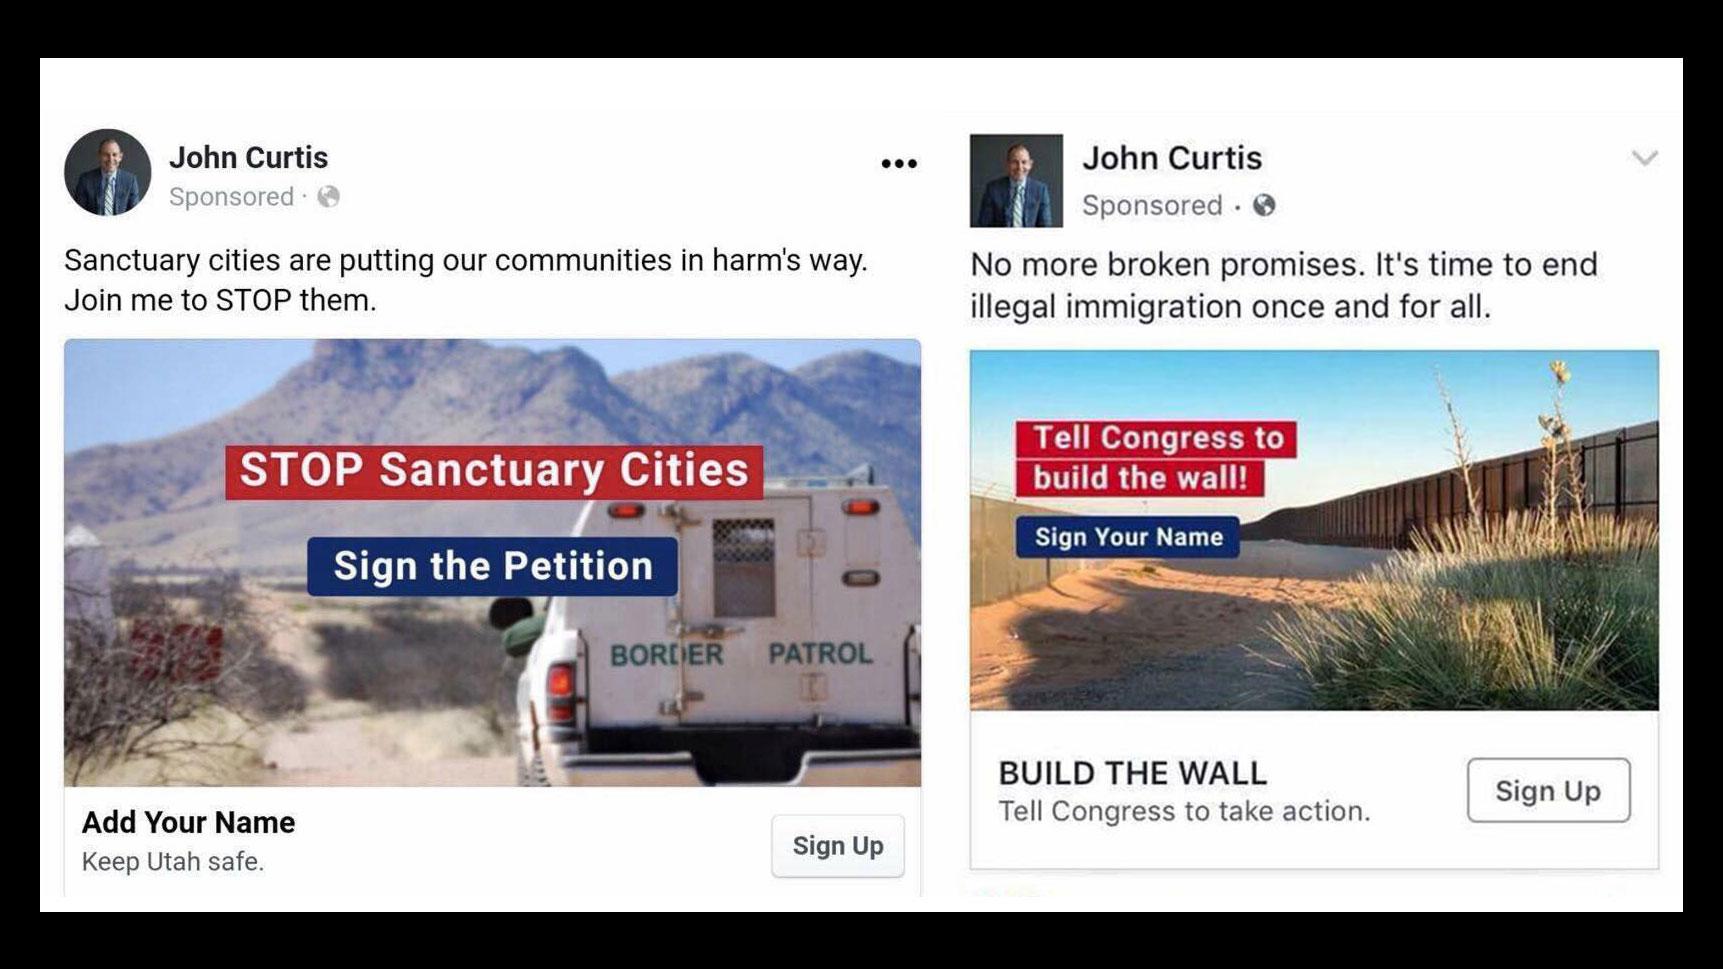 screenshots of two advertisements of Facebook posts by John Curtis